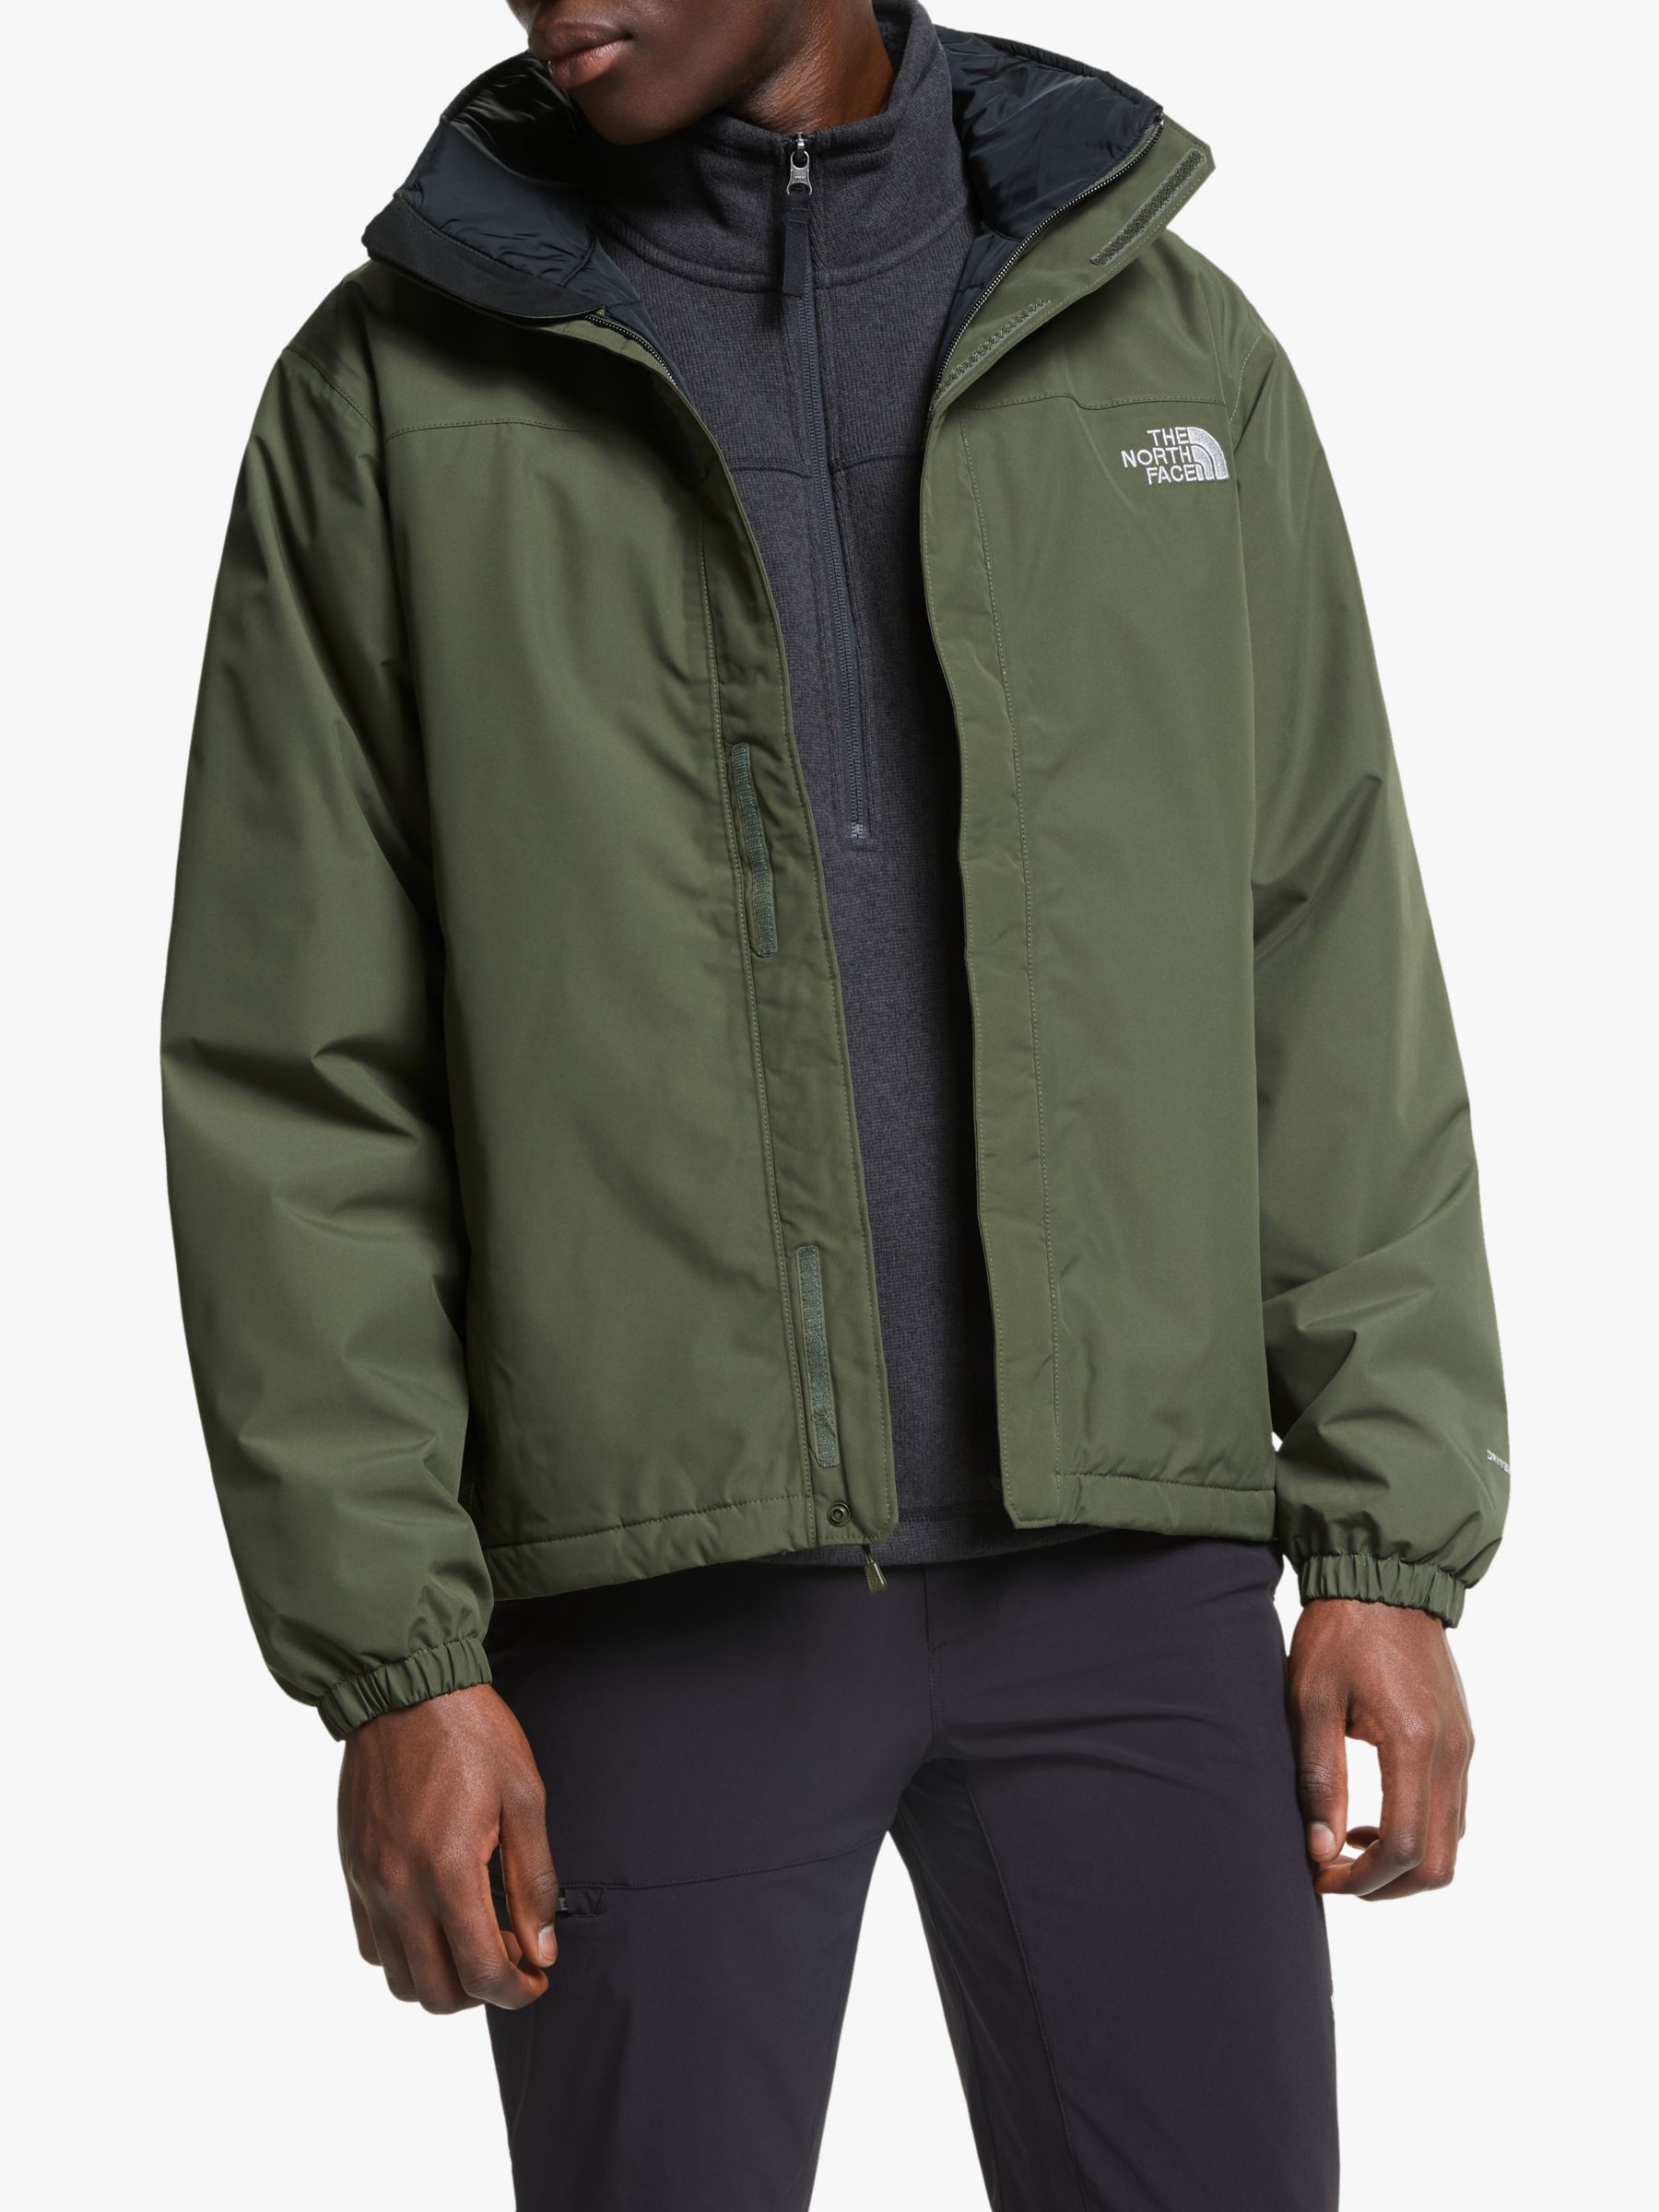 north face resolve insulated jacket review